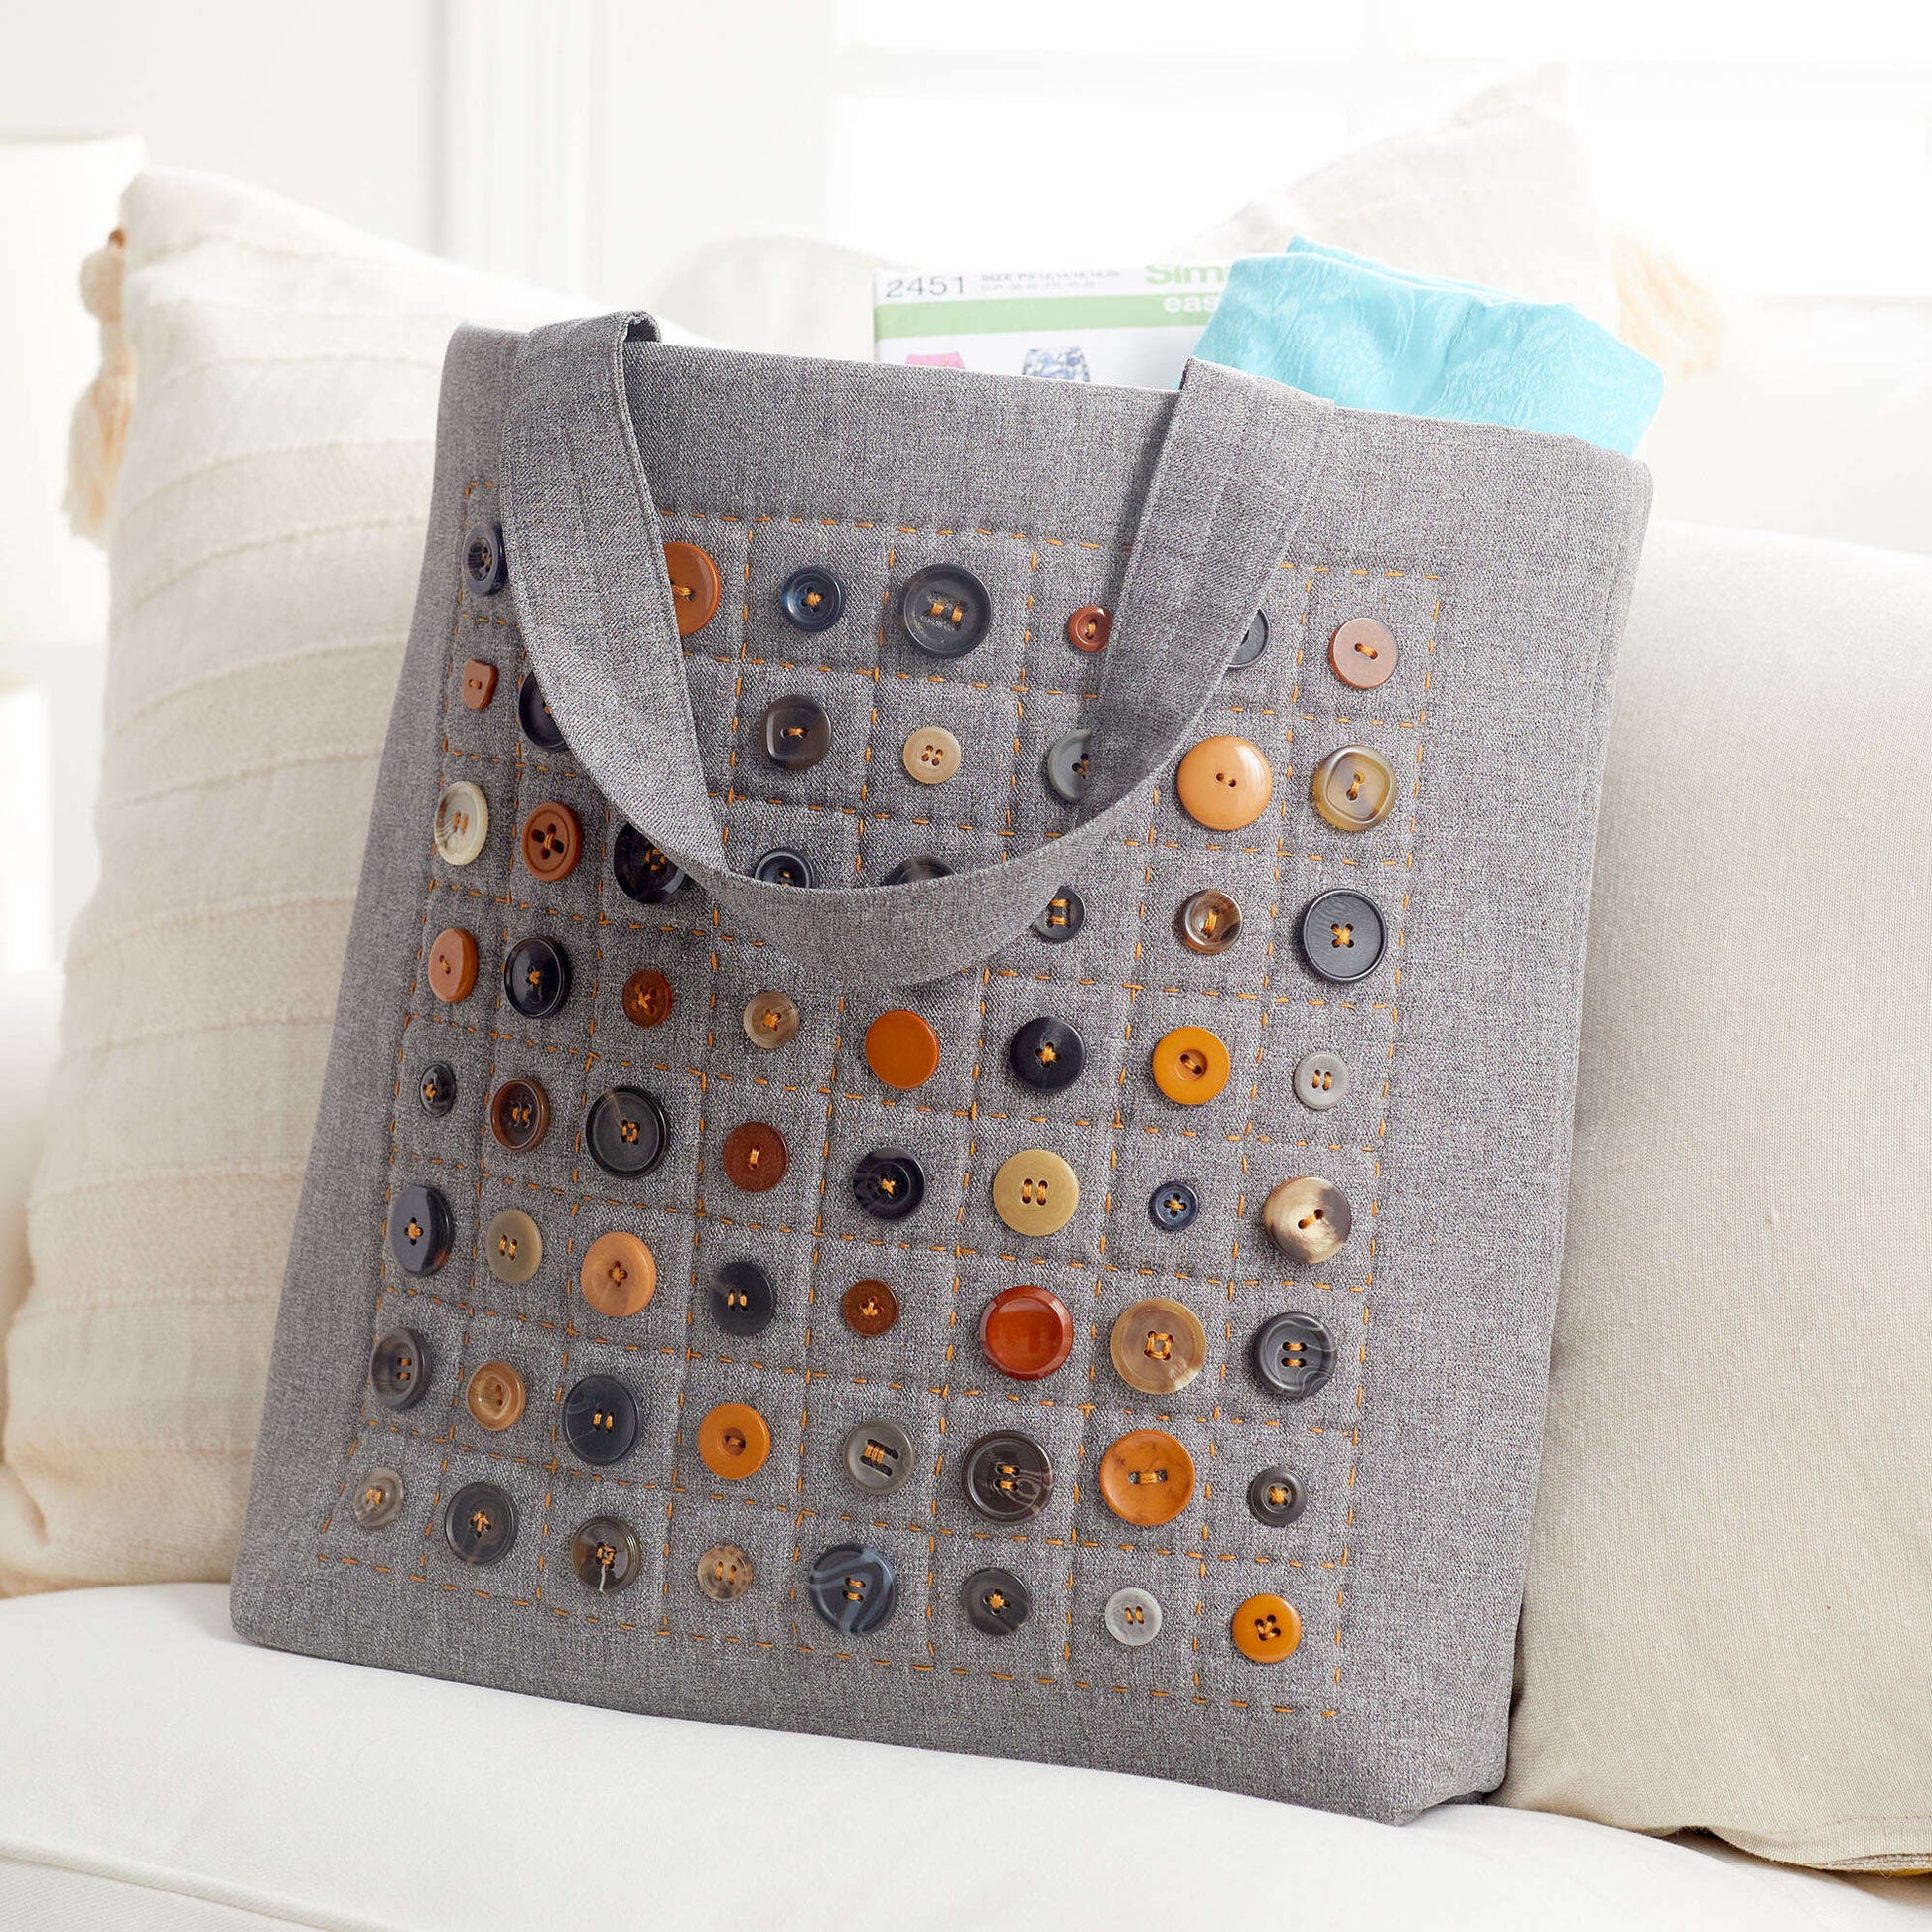 Free Coats & Clark Sewing Button And Big Stitch Tote Pattern